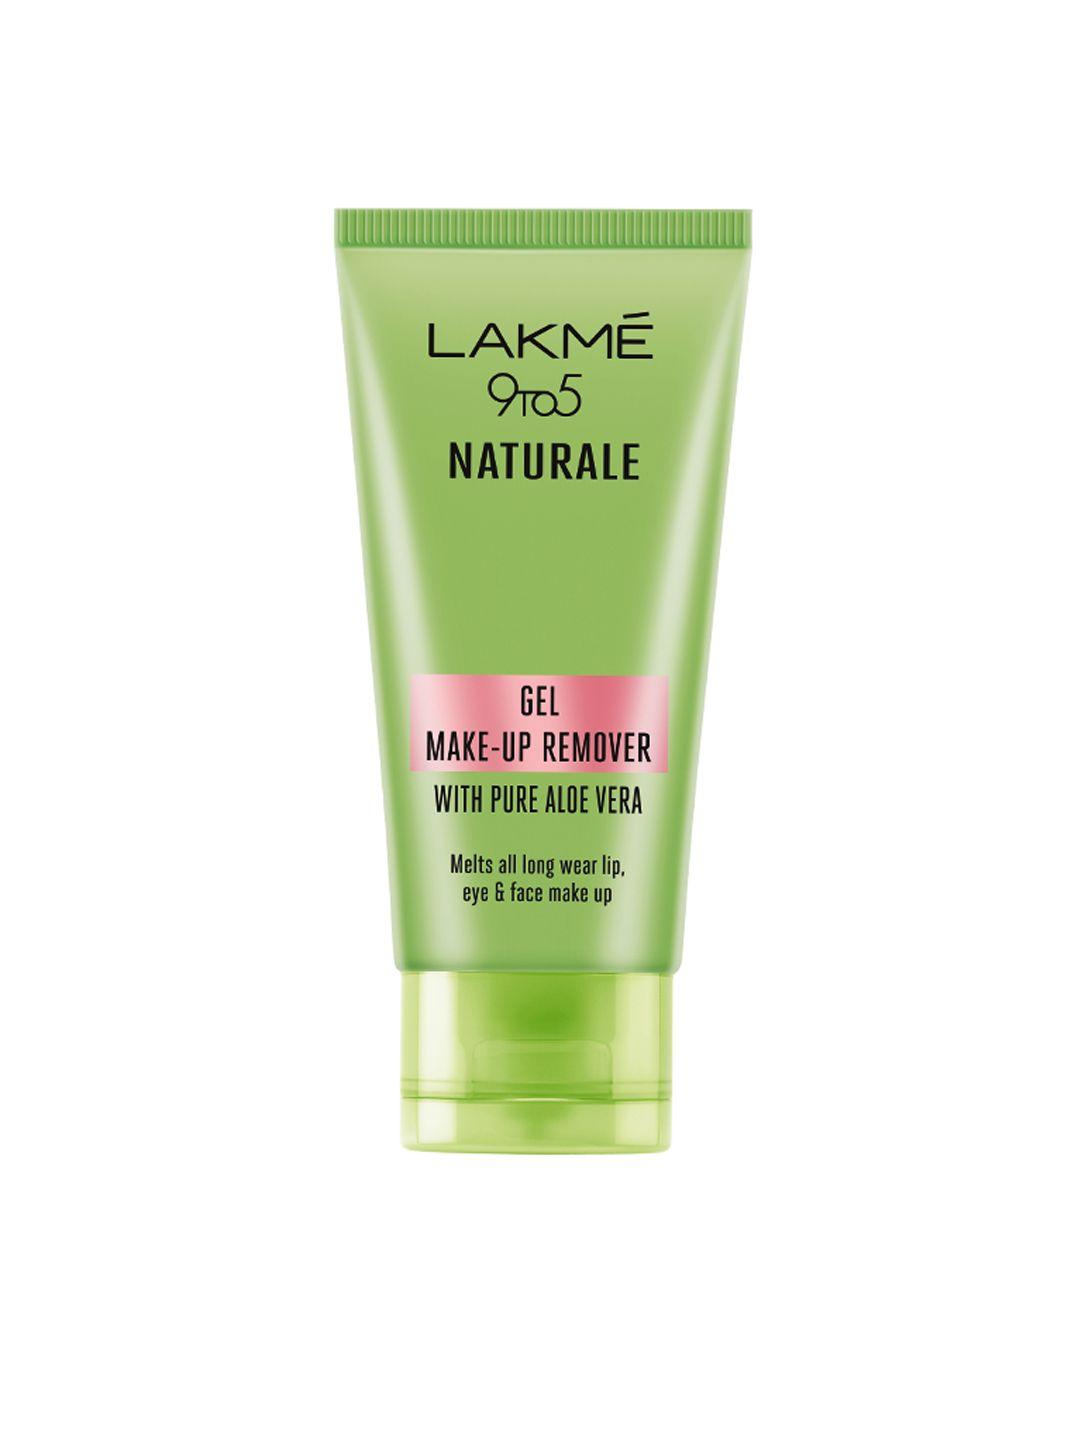 lakme 9to5 naturale gel makeup remover 50g